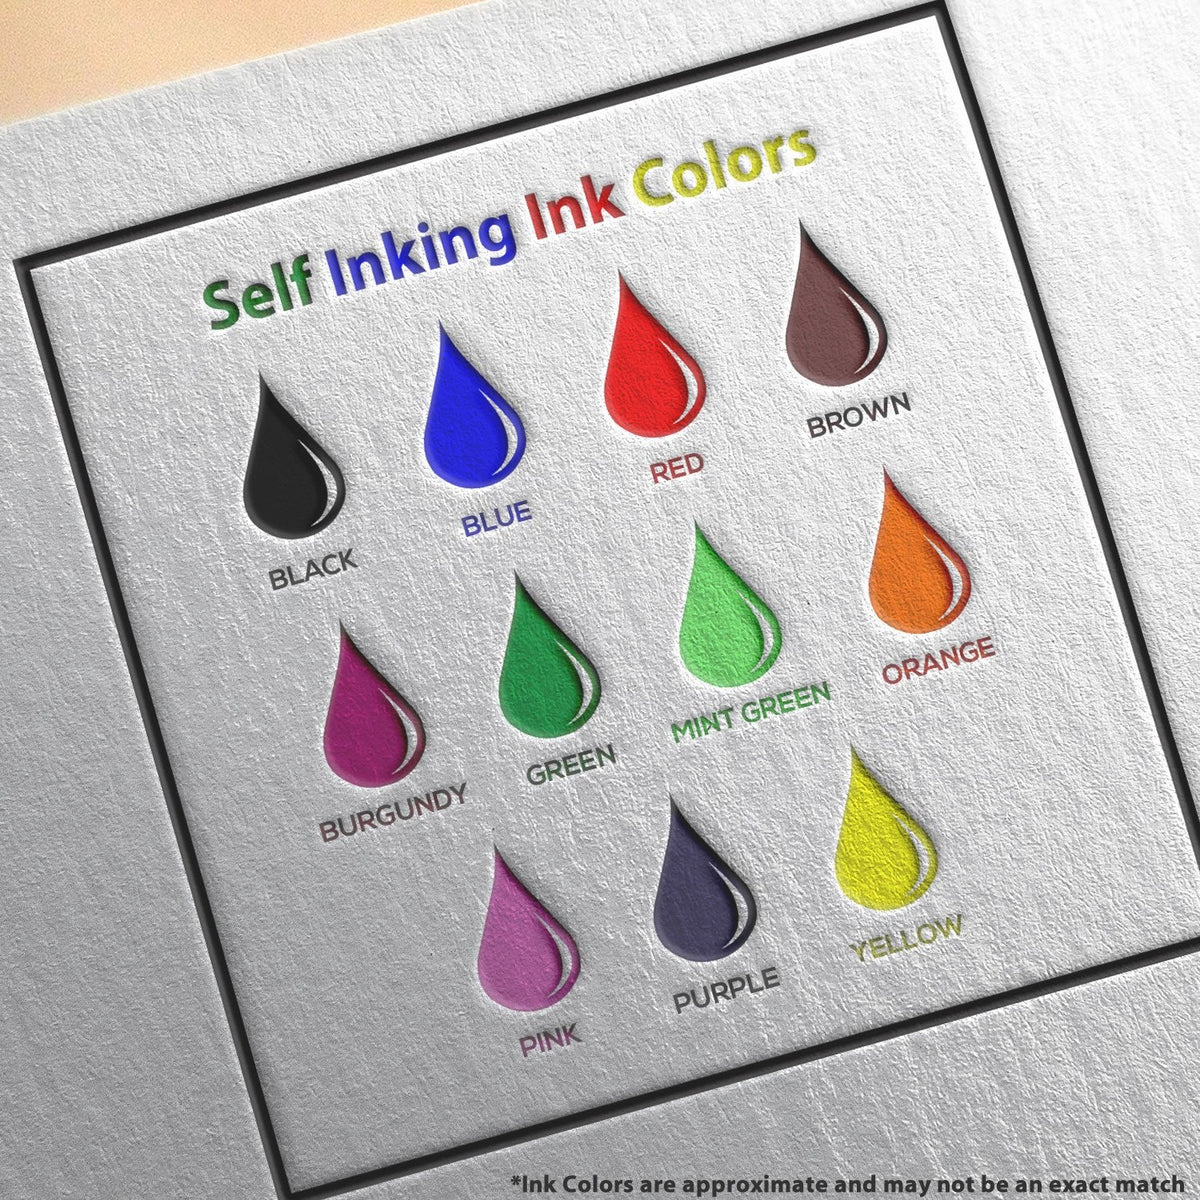 Self-Inking Media Mail Stamp Ink Color Options